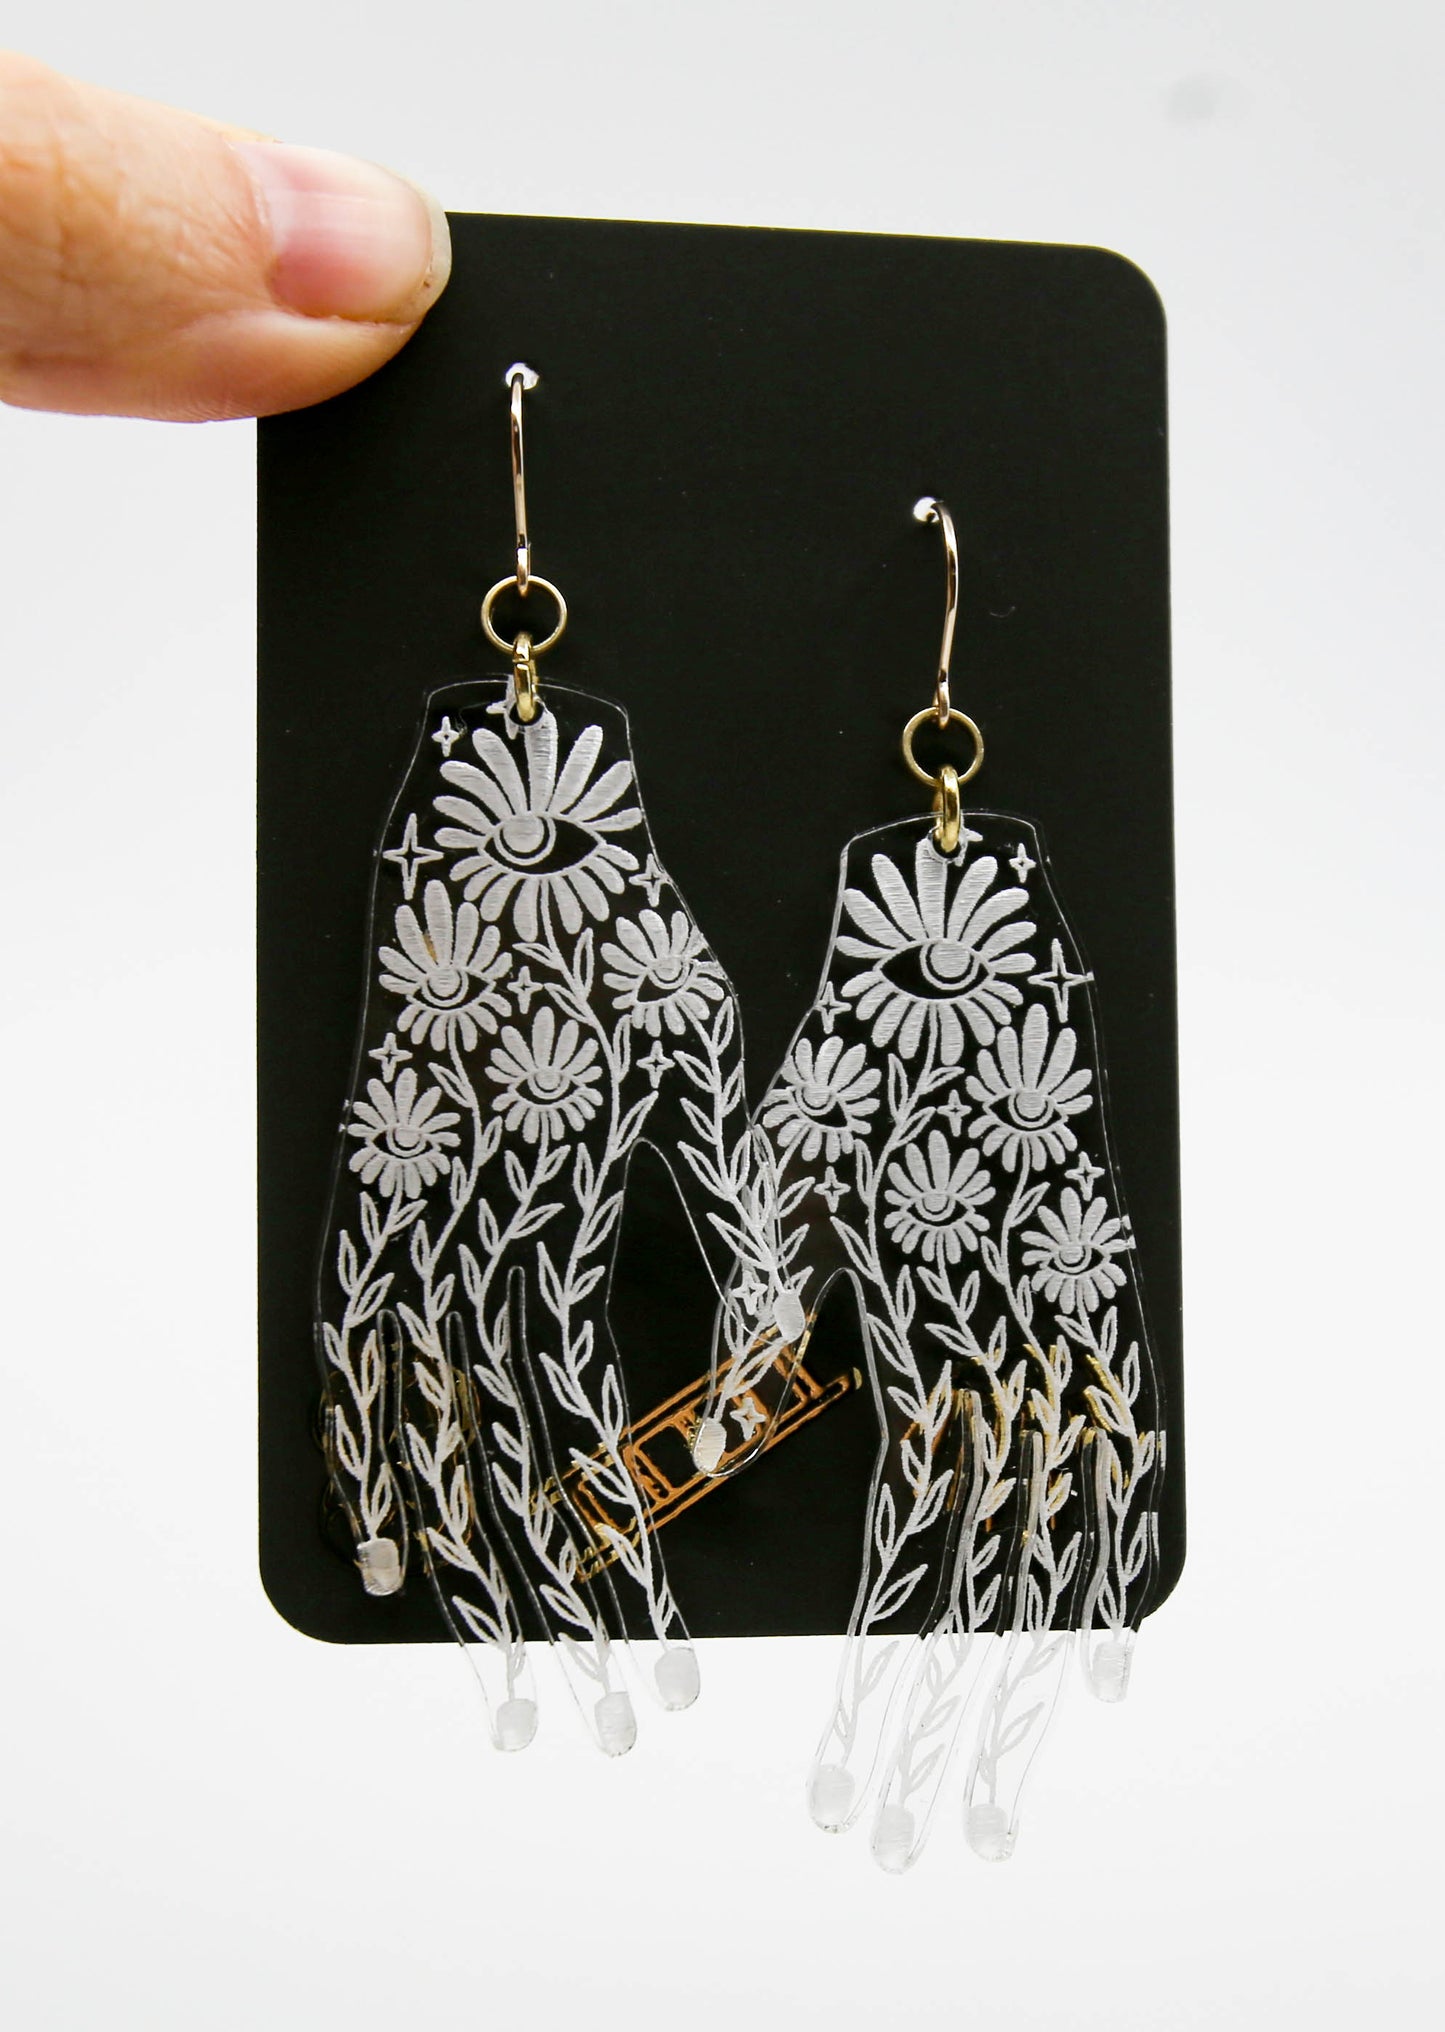 Lucite Floral Hand Earrings